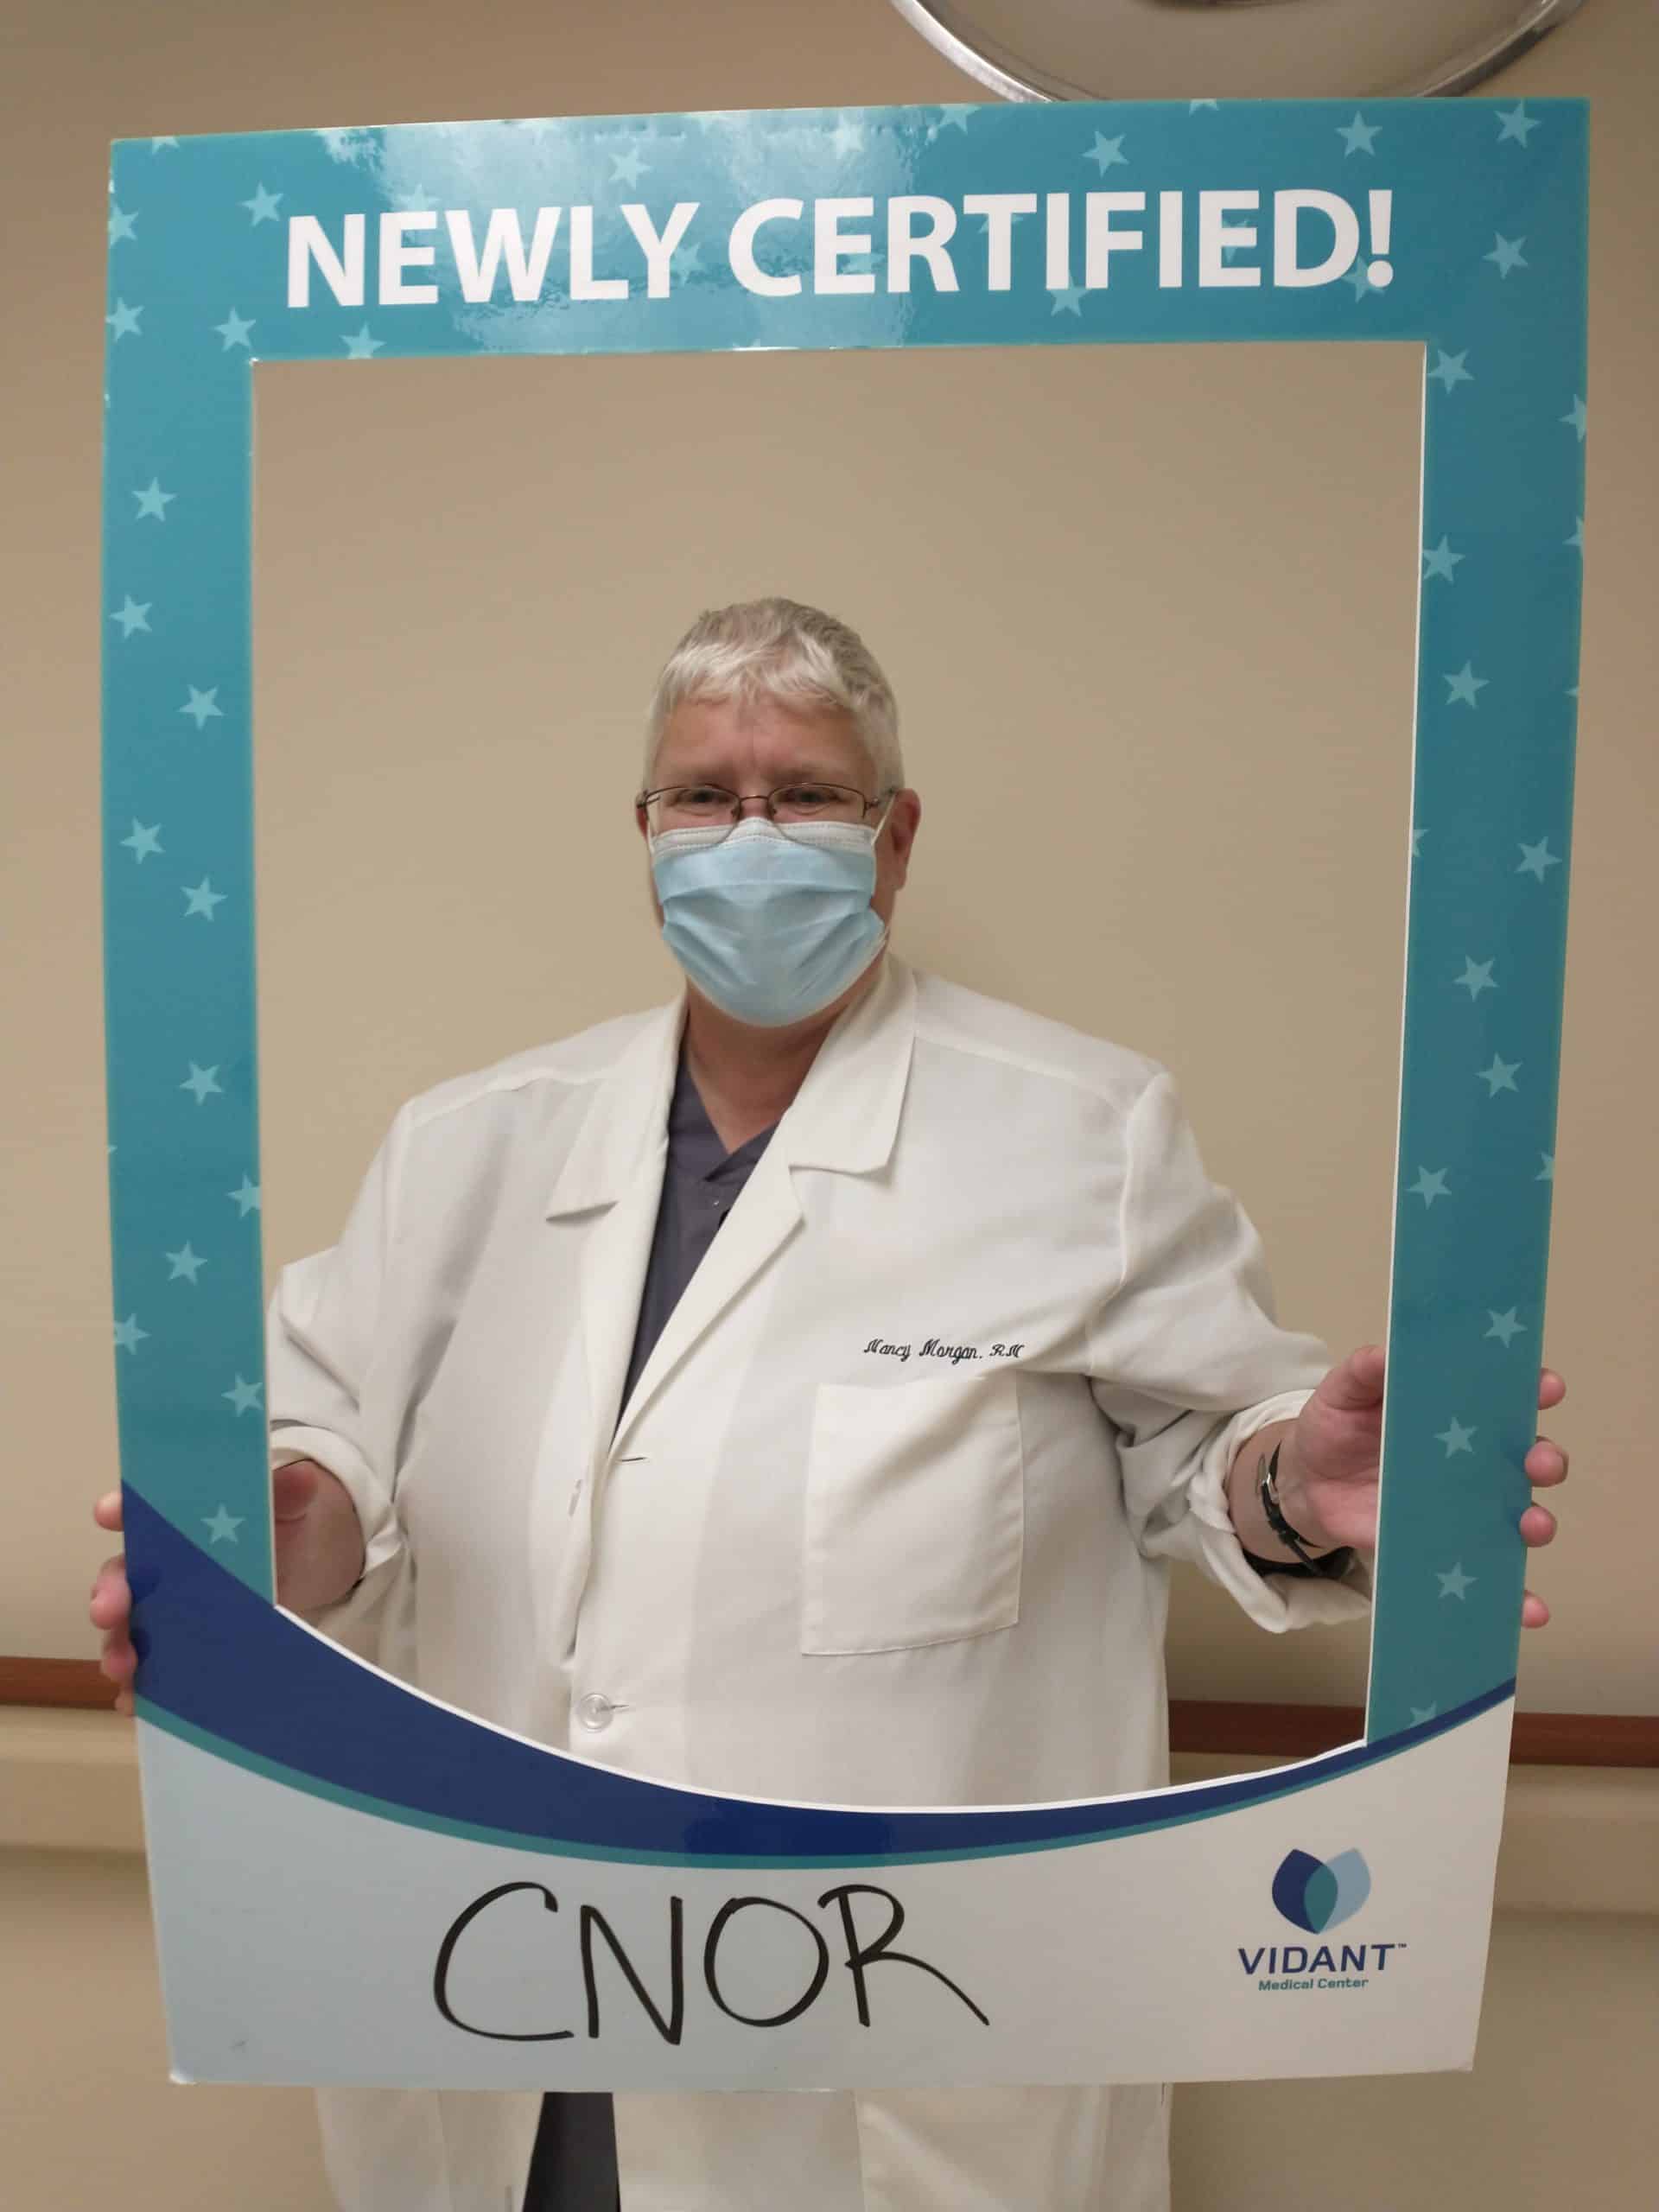 Nancy Morgan, RN, CNOR works in the operating room and received her certified nurse of OR certifications